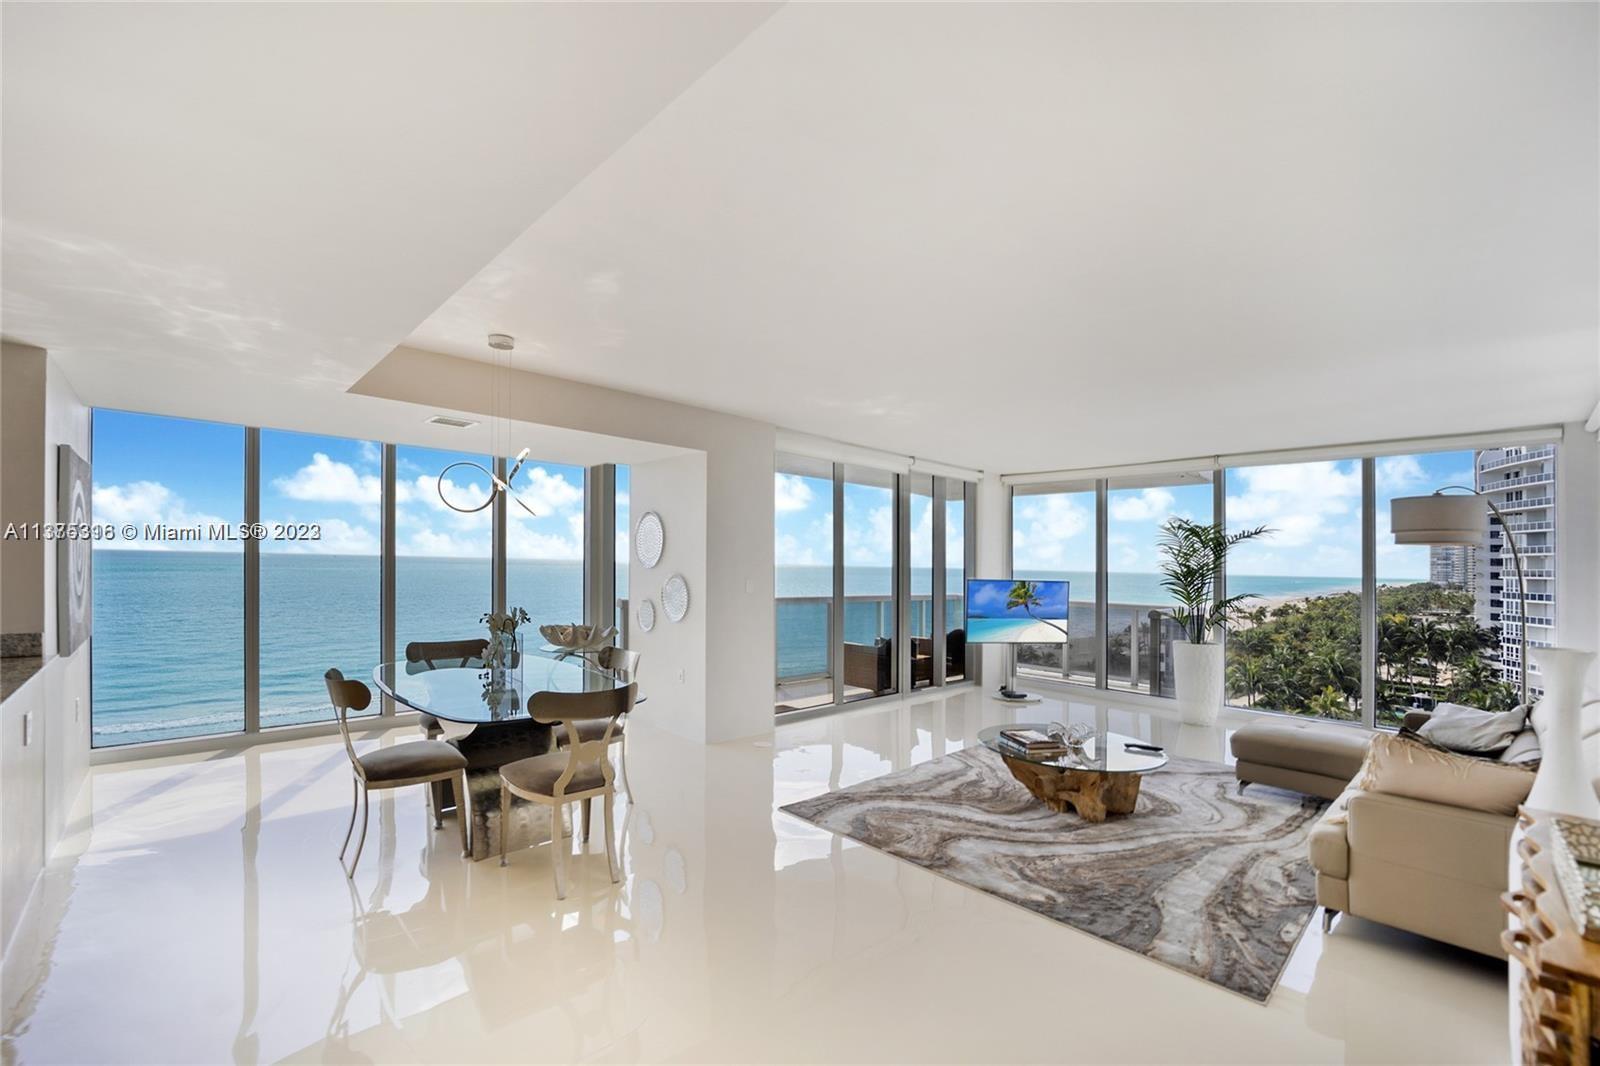 Photo 2 of Harbour House Apt 810 in Bal Harbour - MLS A11375316